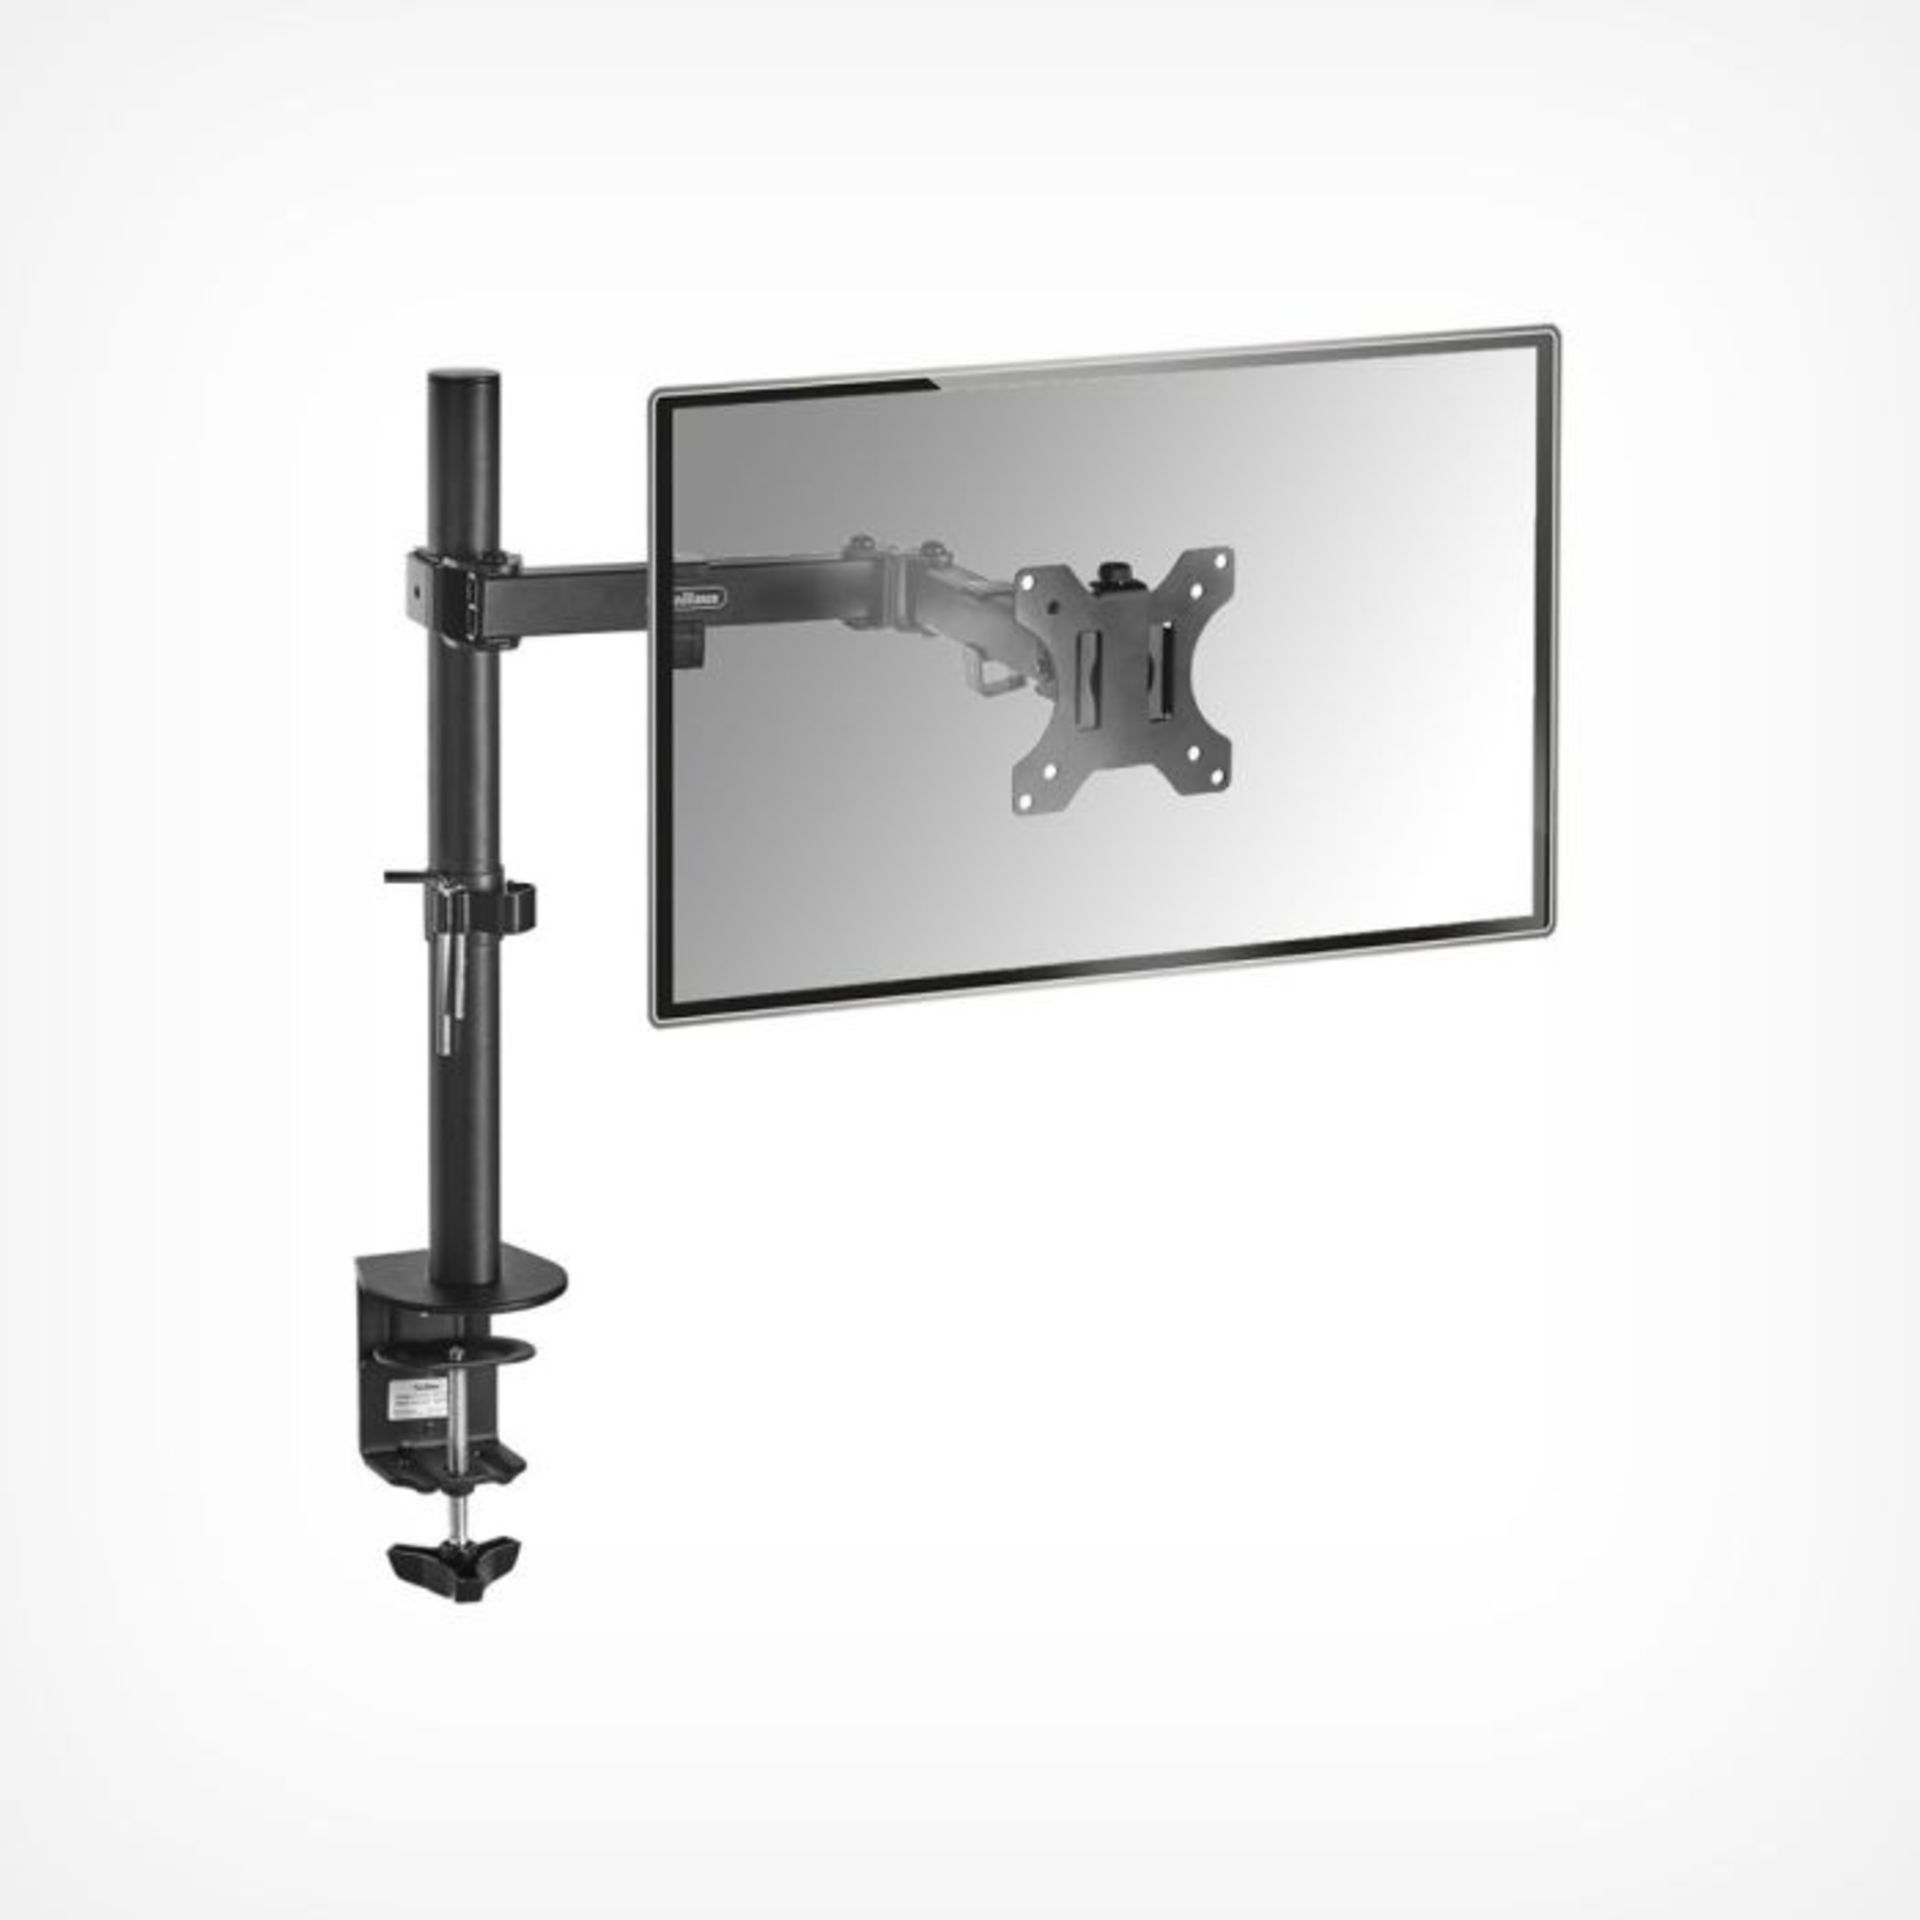 Monitor Mount With Desk Clamp. RRP £30 - Grade U